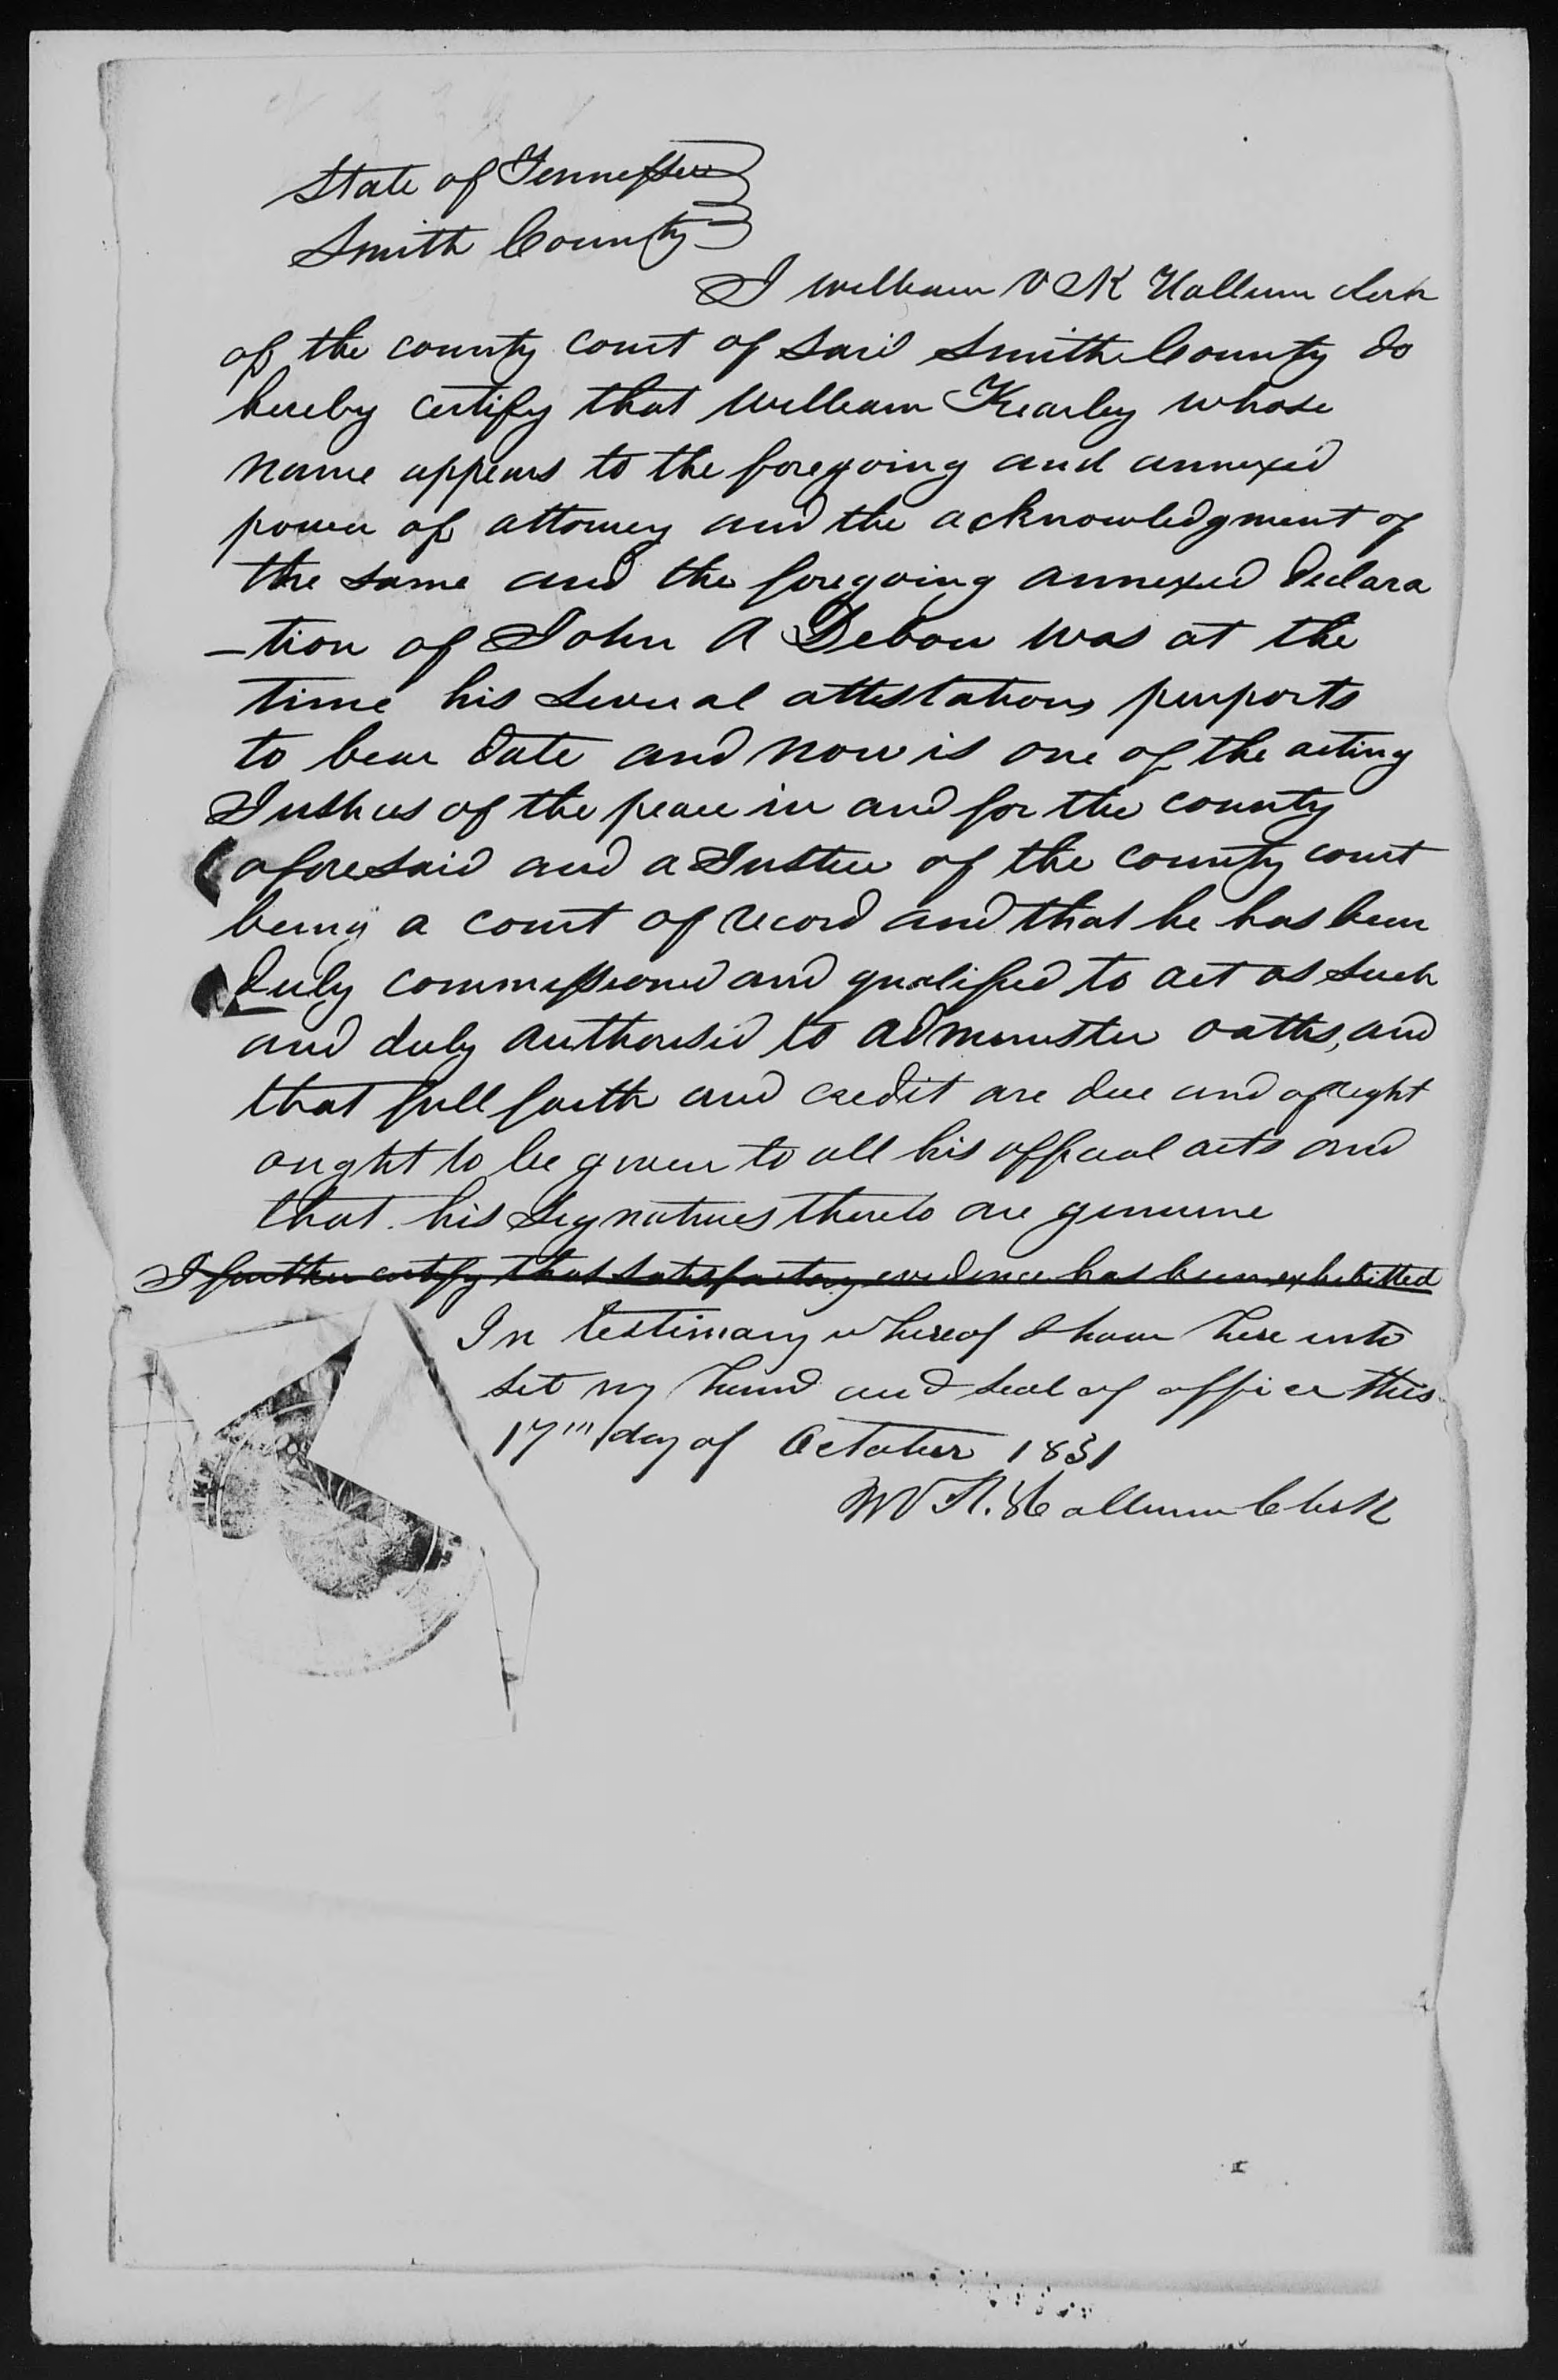 Declaration of John A. Debow to the U.S. Pension Office, 18 August 1851, page 4